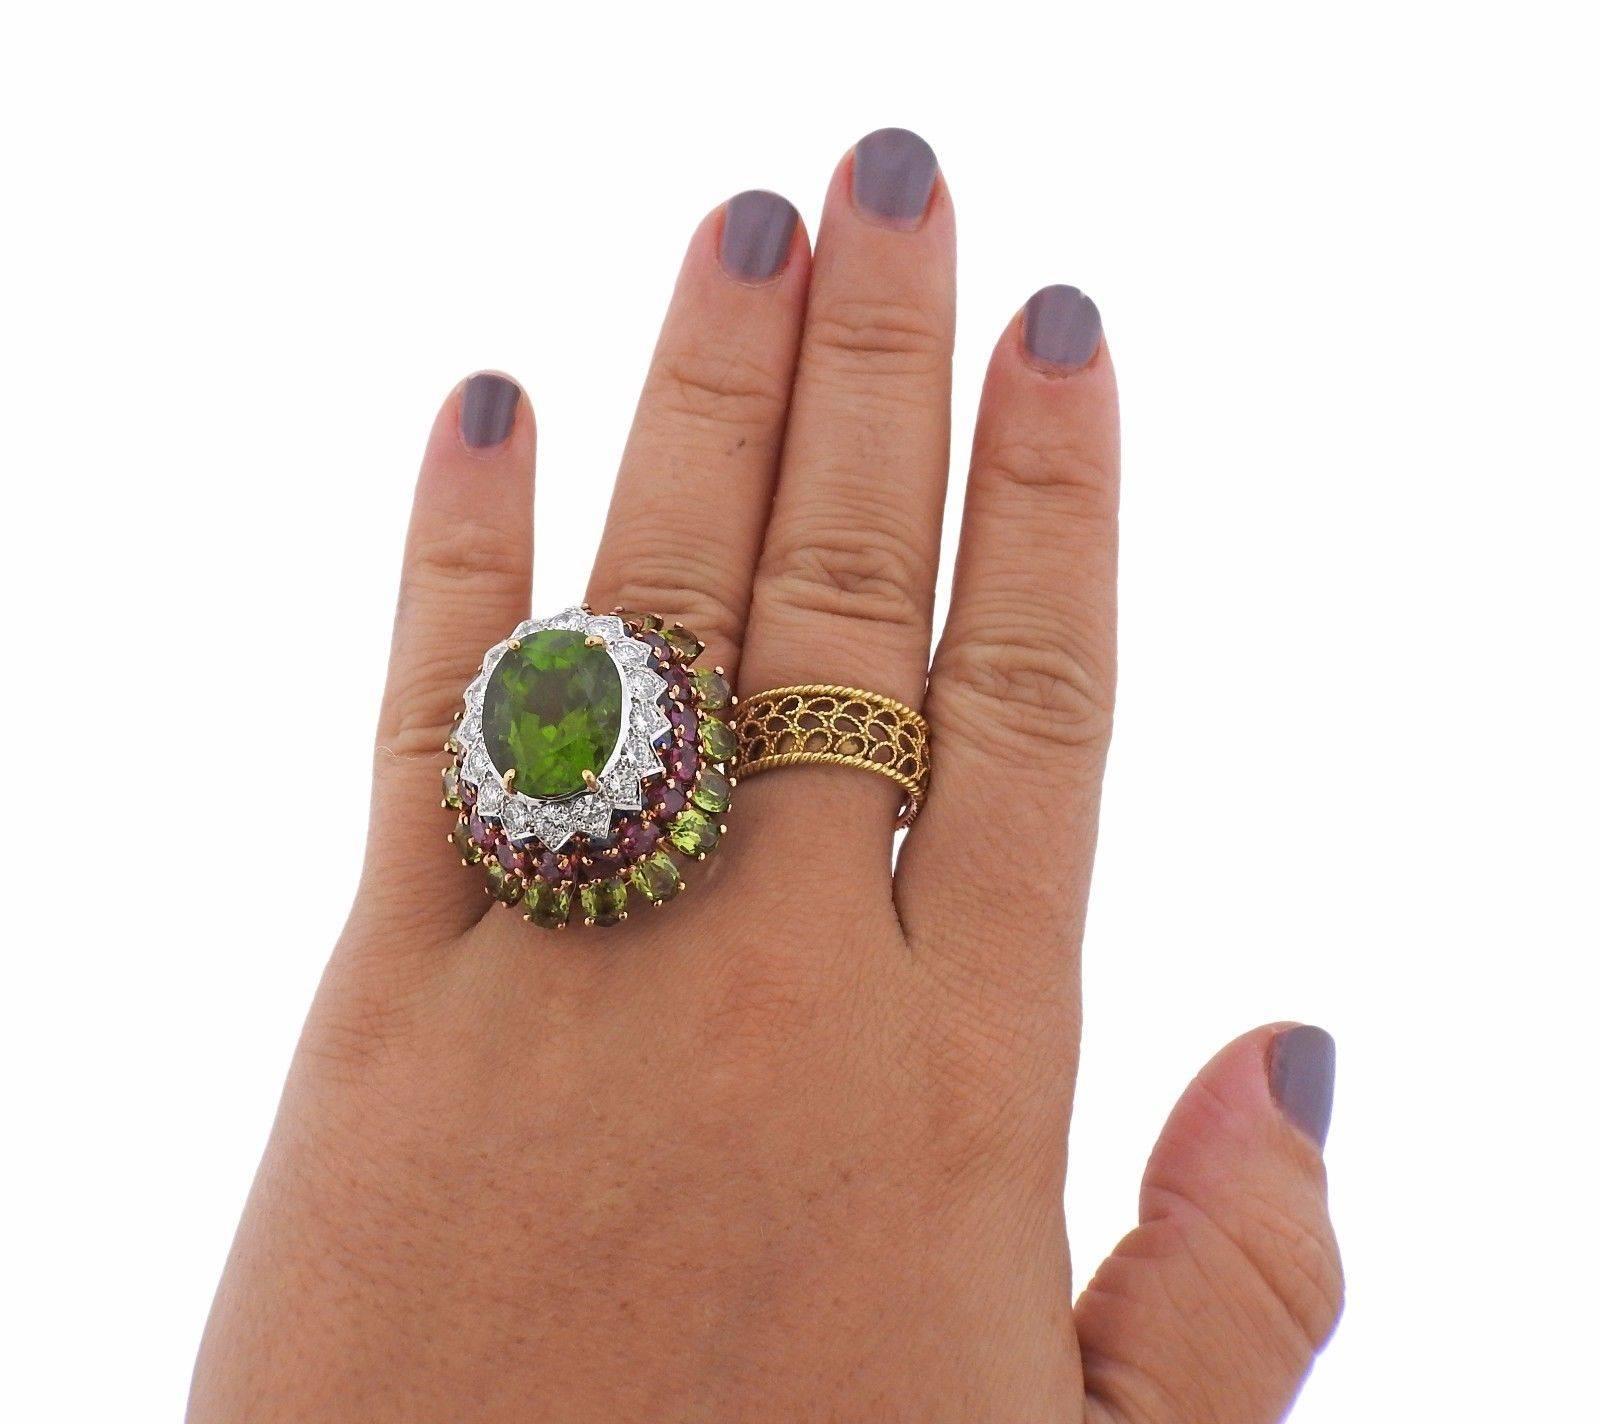 An 18k yellow gold ring set with a 13 carat peridot which is accented by sapphires, rubies, peridots and approximately 1.60ctw of GH/VS-SI1 diamonds.  The ring is a size 5 1/2, ring top is 30mm x 27mm, sits approx. 21mm from the top of the finger. 